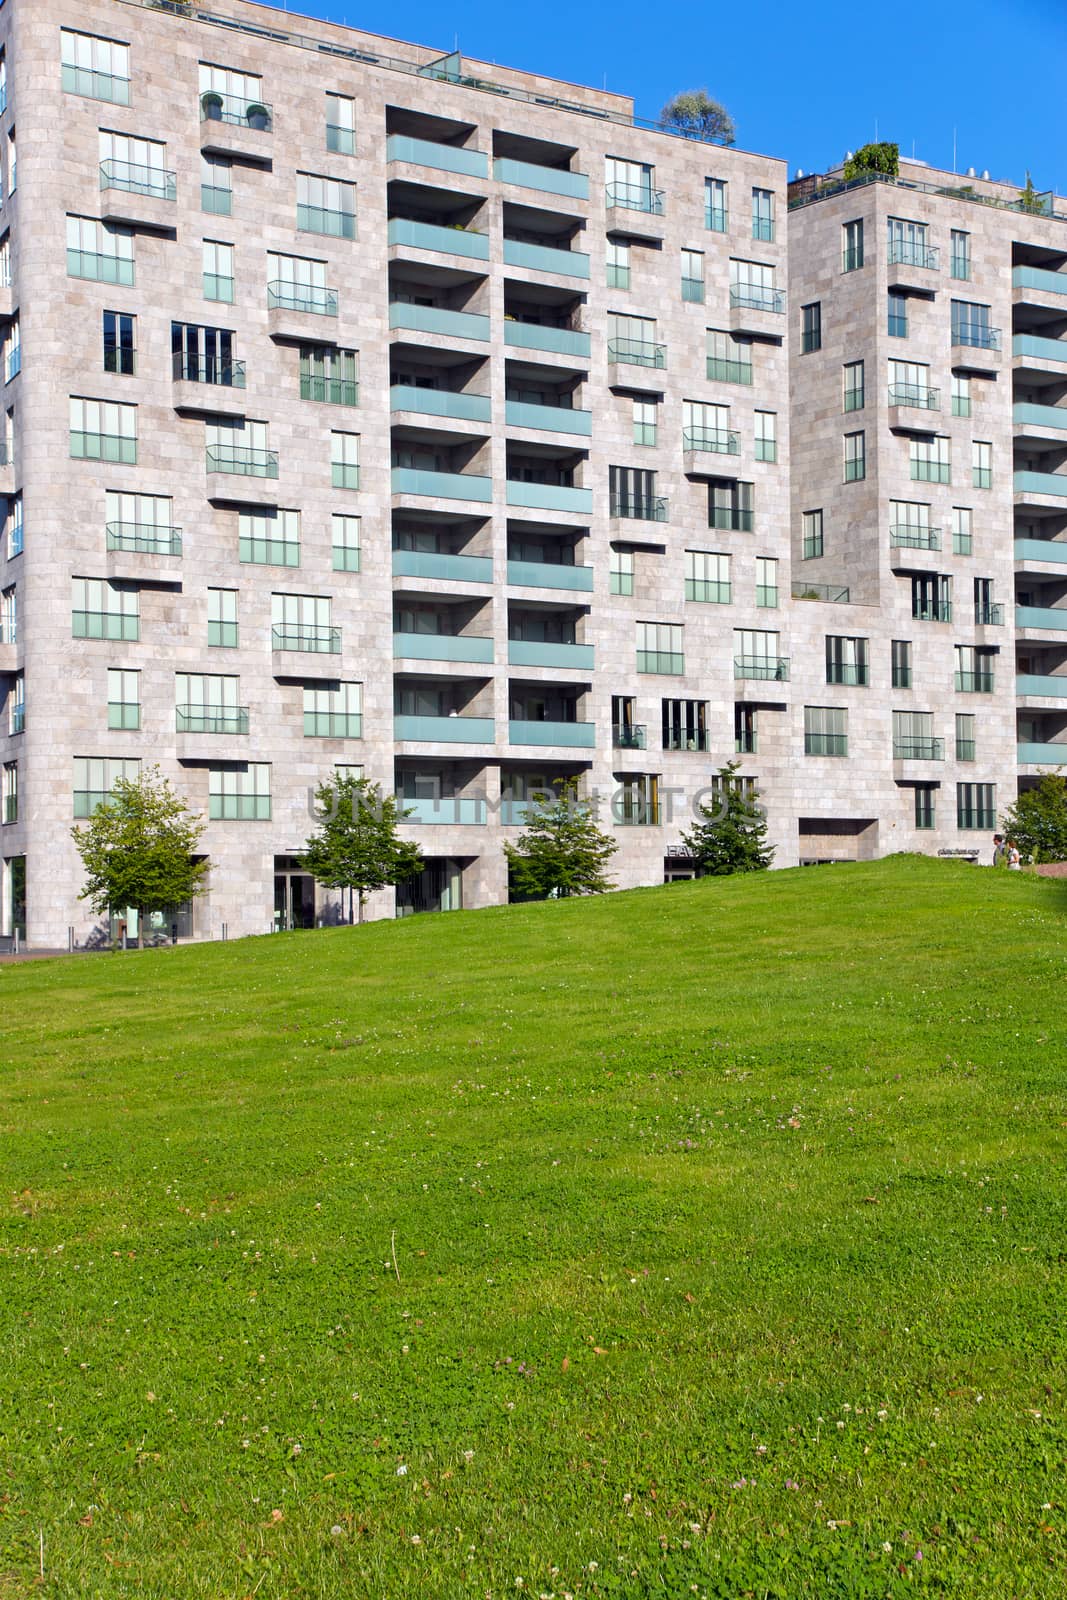 Beautiful grey apartment house with green grass in front of it